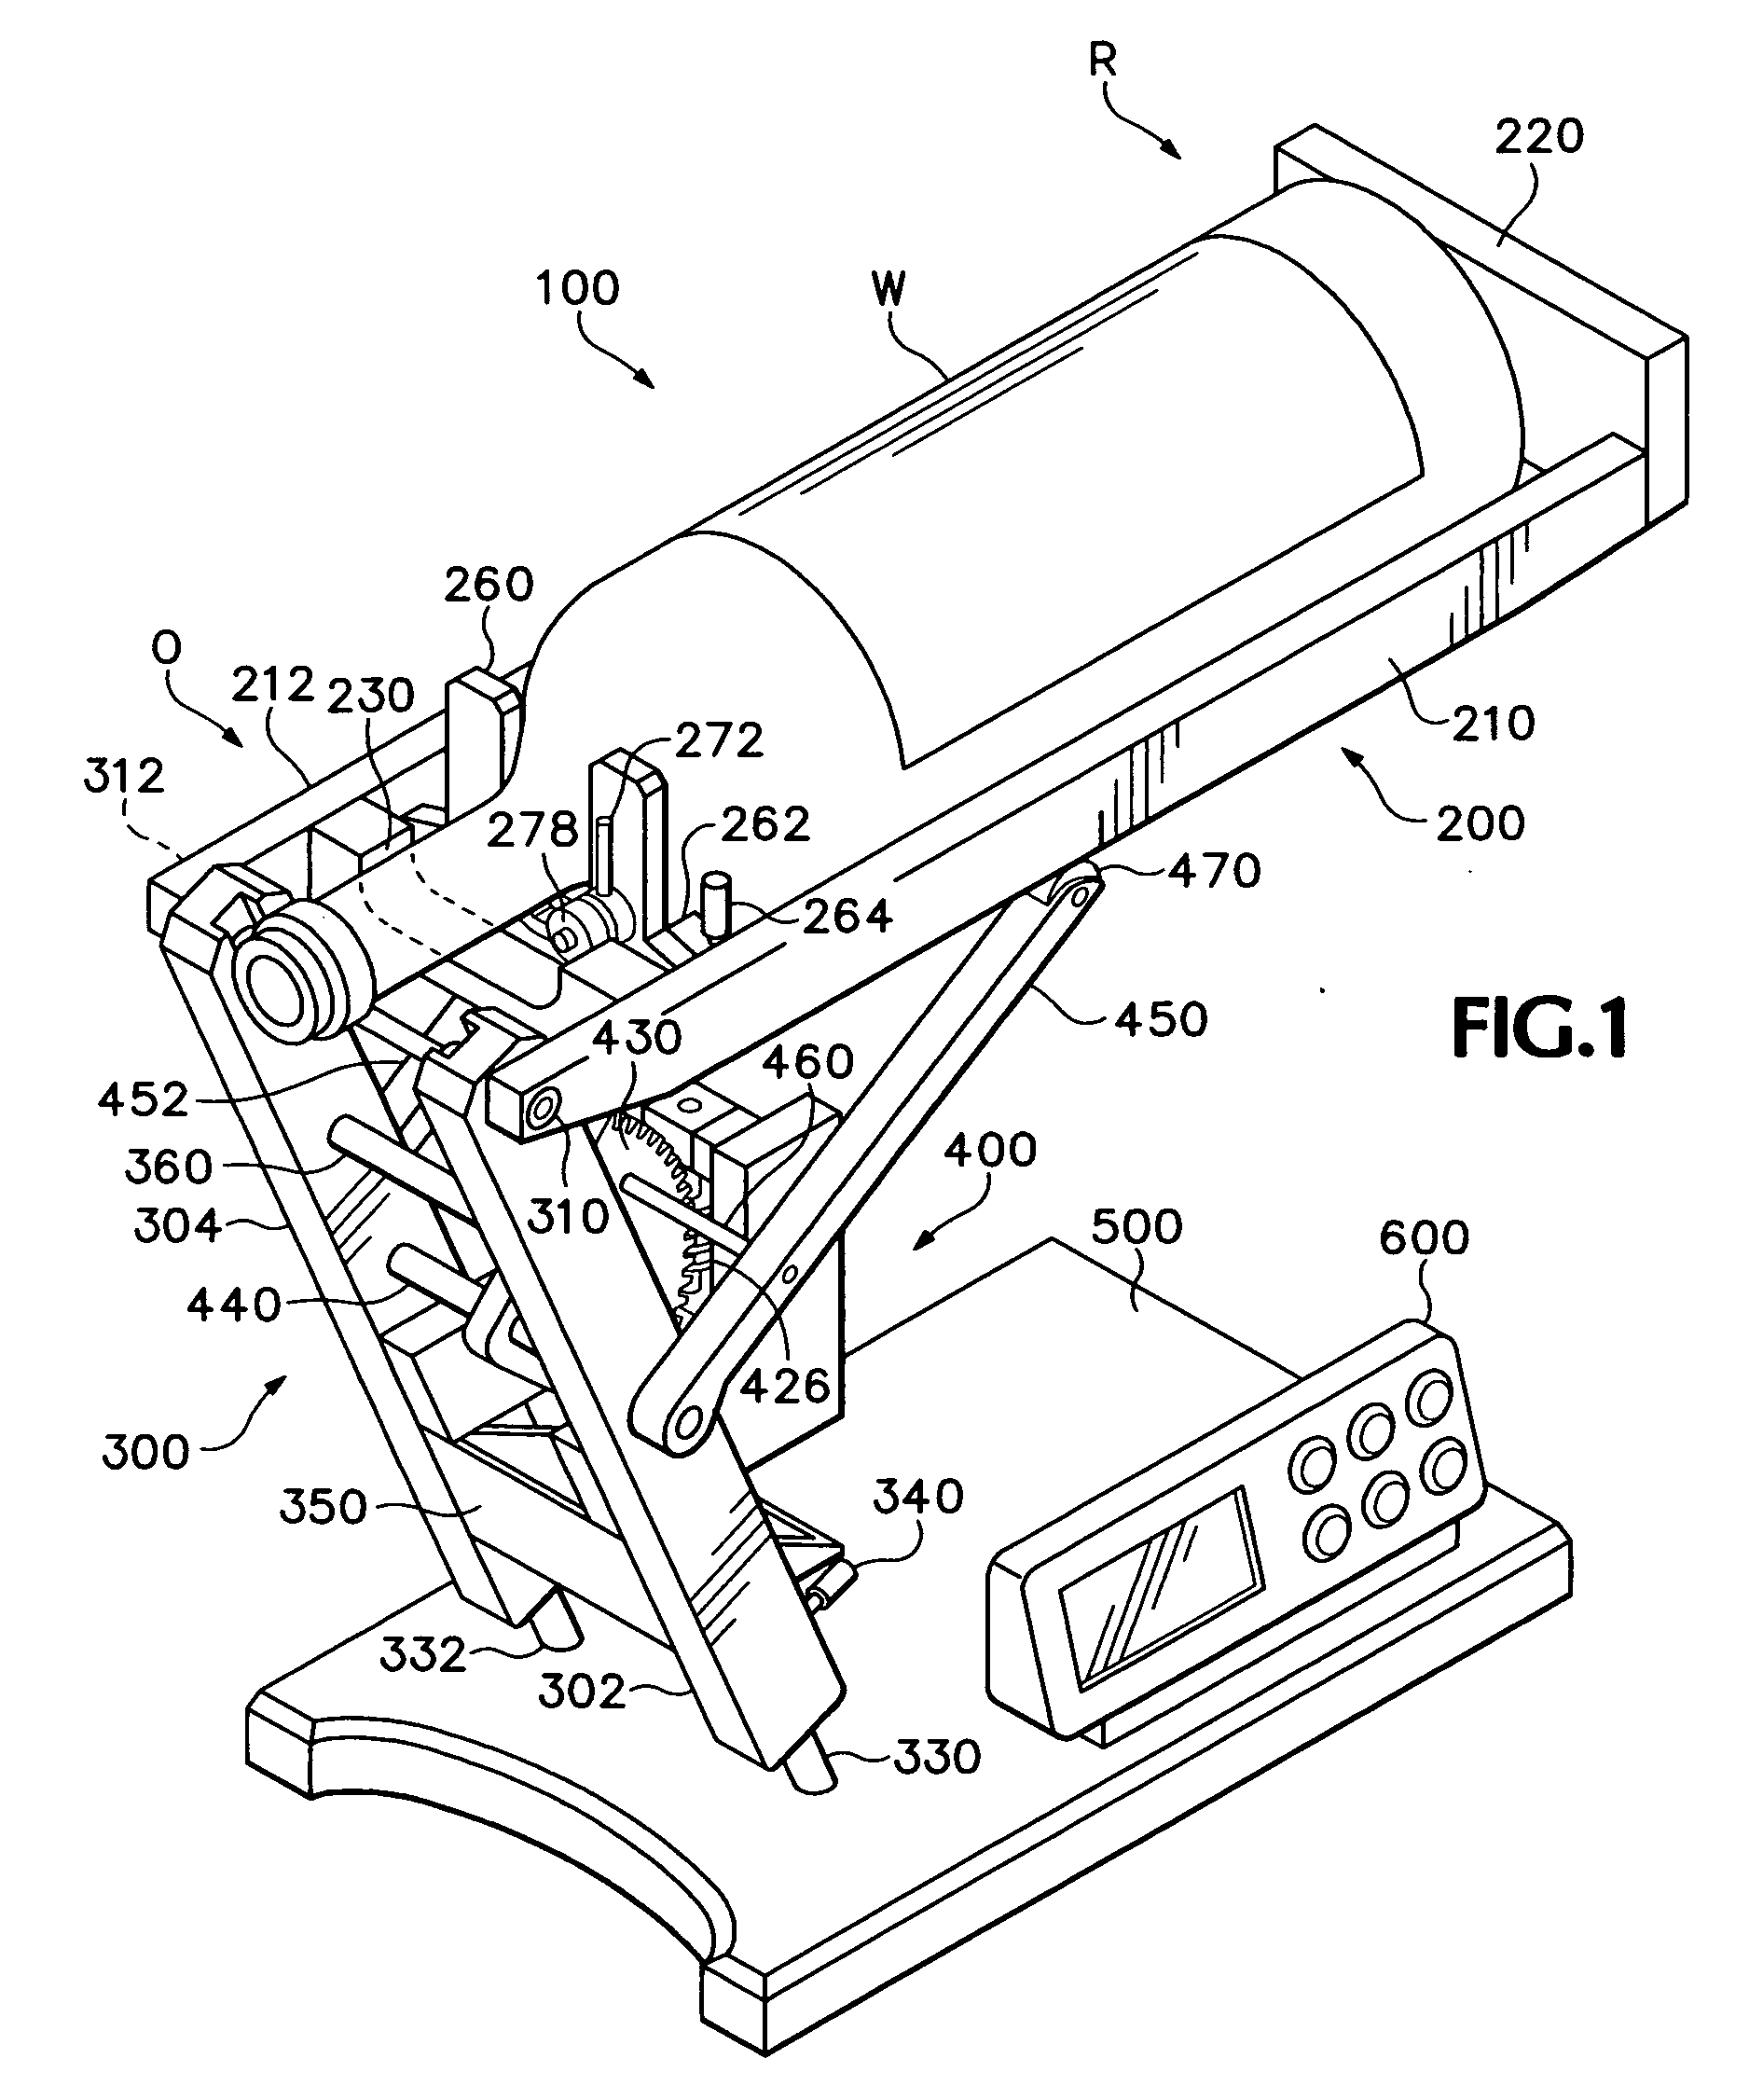 Wine decanting appliance and method for decanting